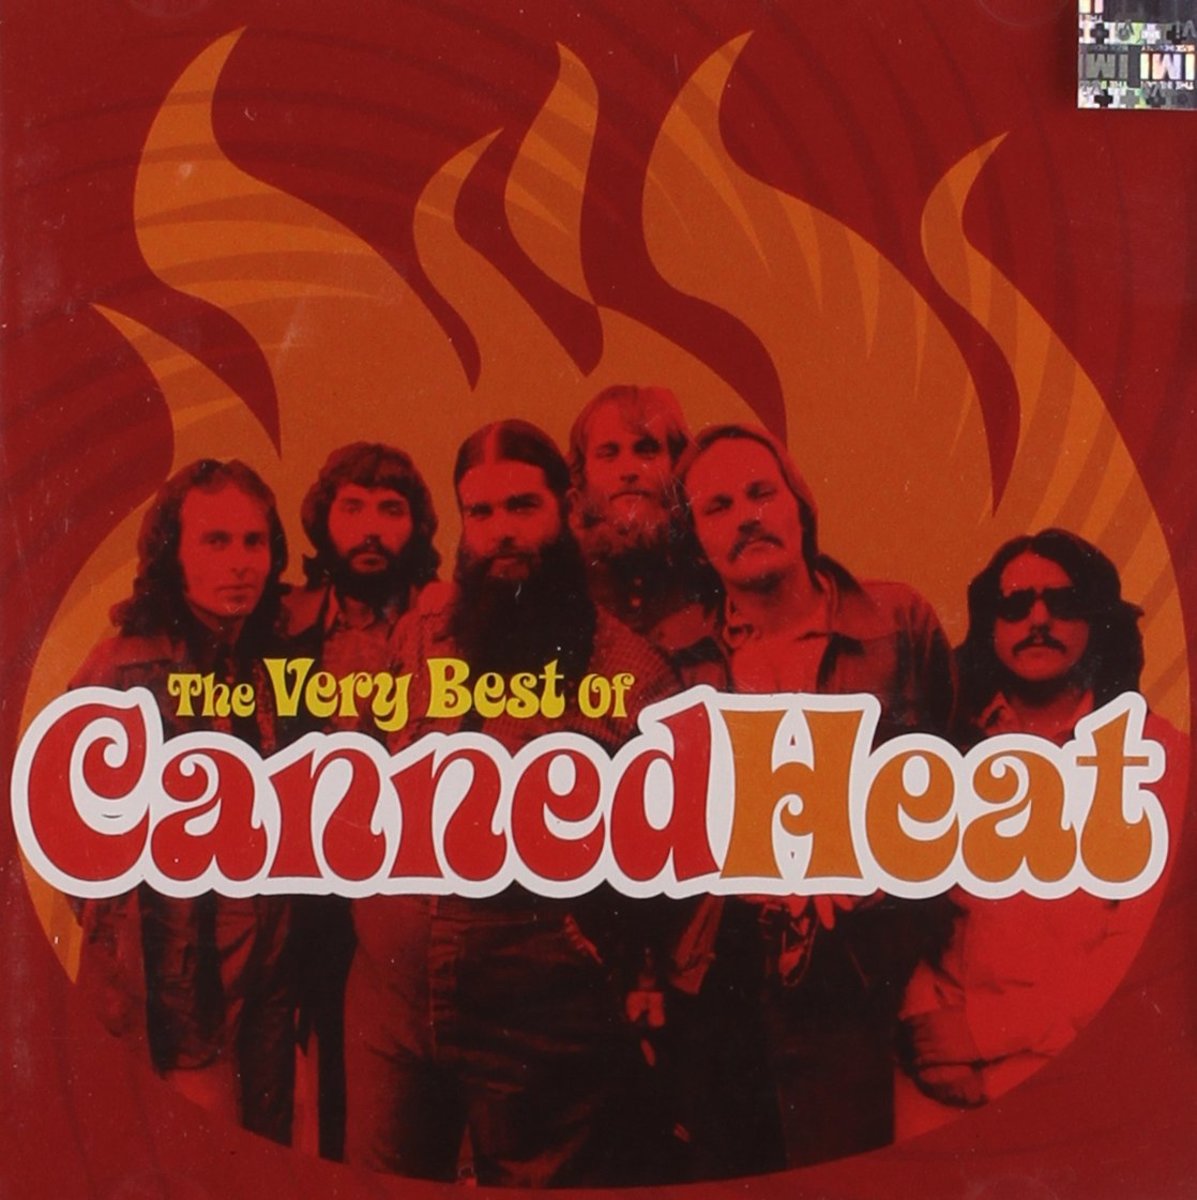 The Very Best of Canned Heat album is a Rocking and Bluesy Trip